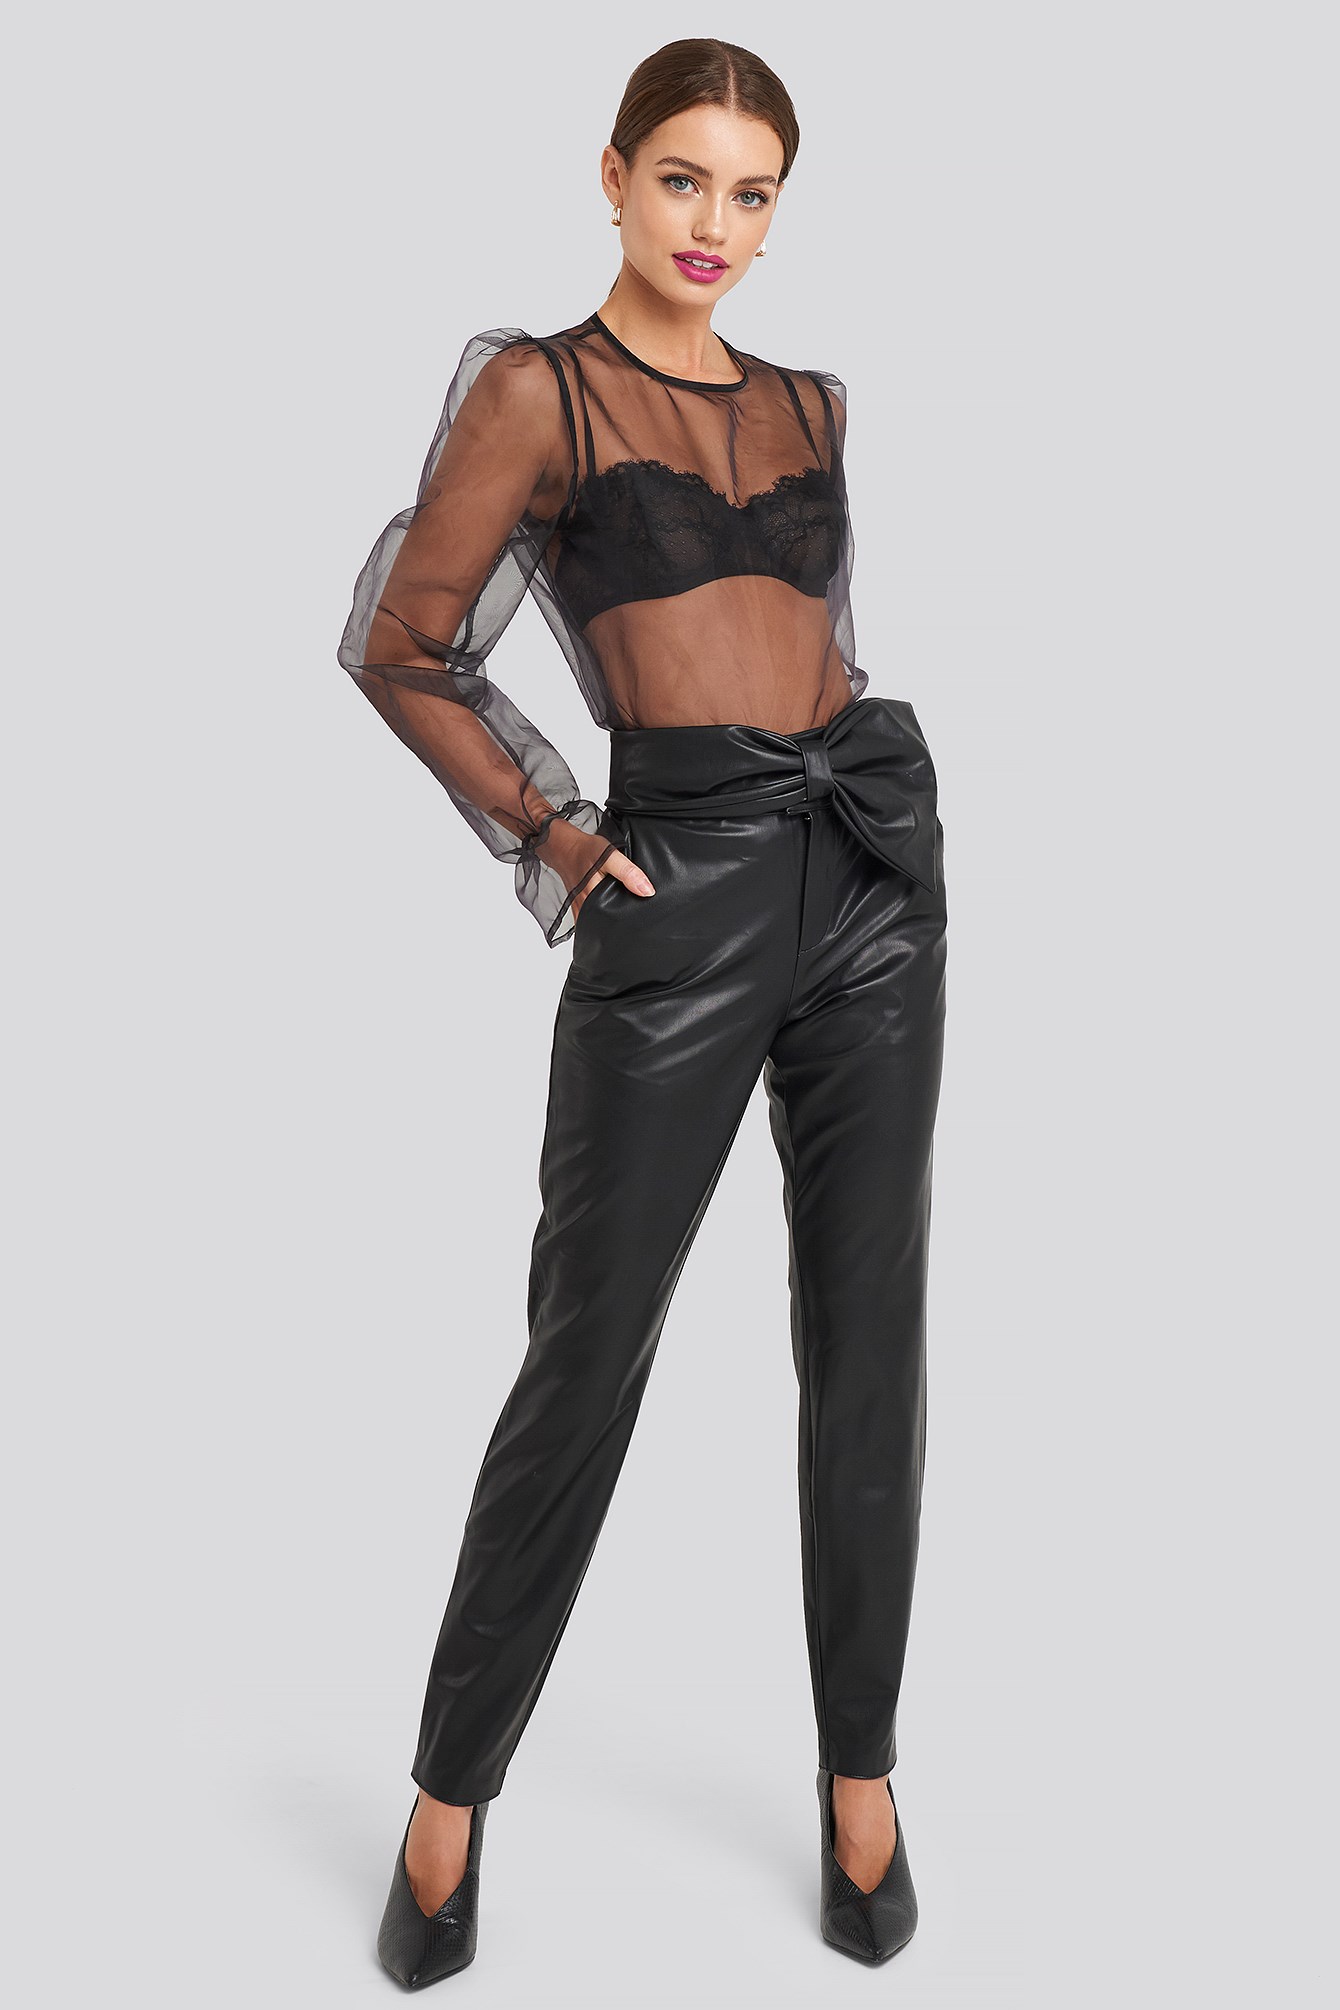 Bow-detail faux leather trousers Black Farfetch Girls Clothing Pants Leather Pants 